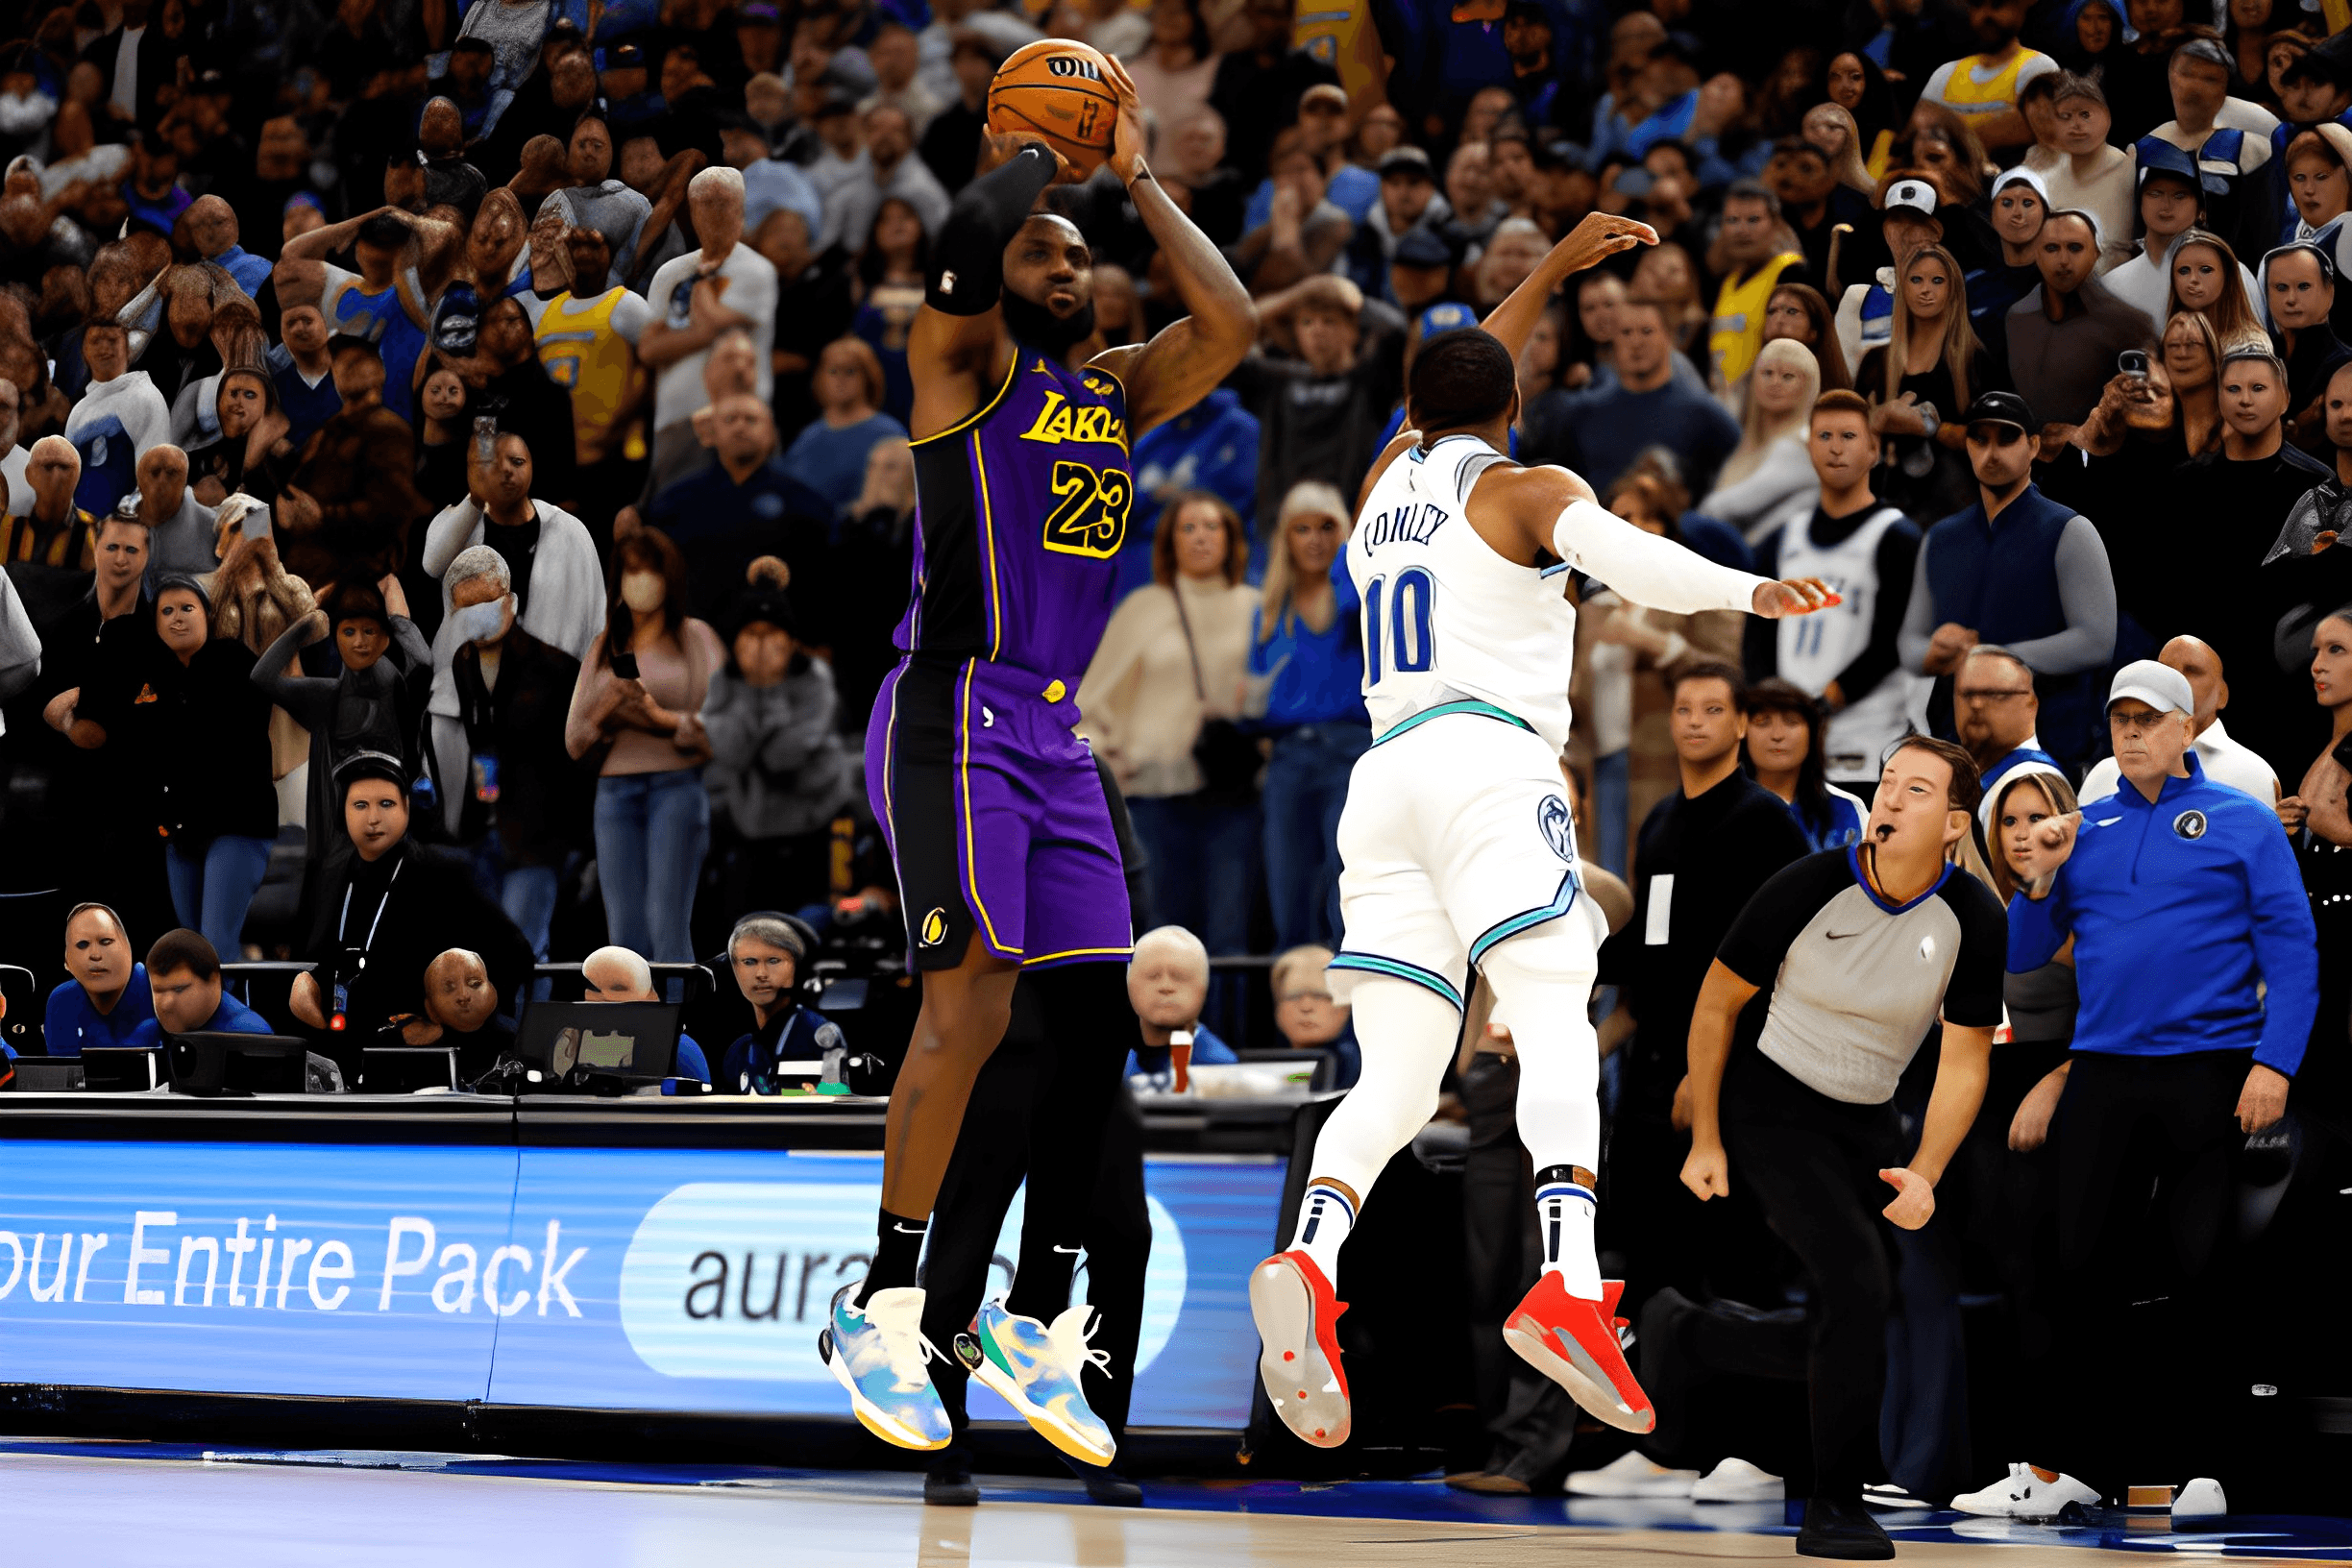 LeBron James shooting over Mike Conley in Lakers vs Timberwolves game at Target Center, Minneapolis.